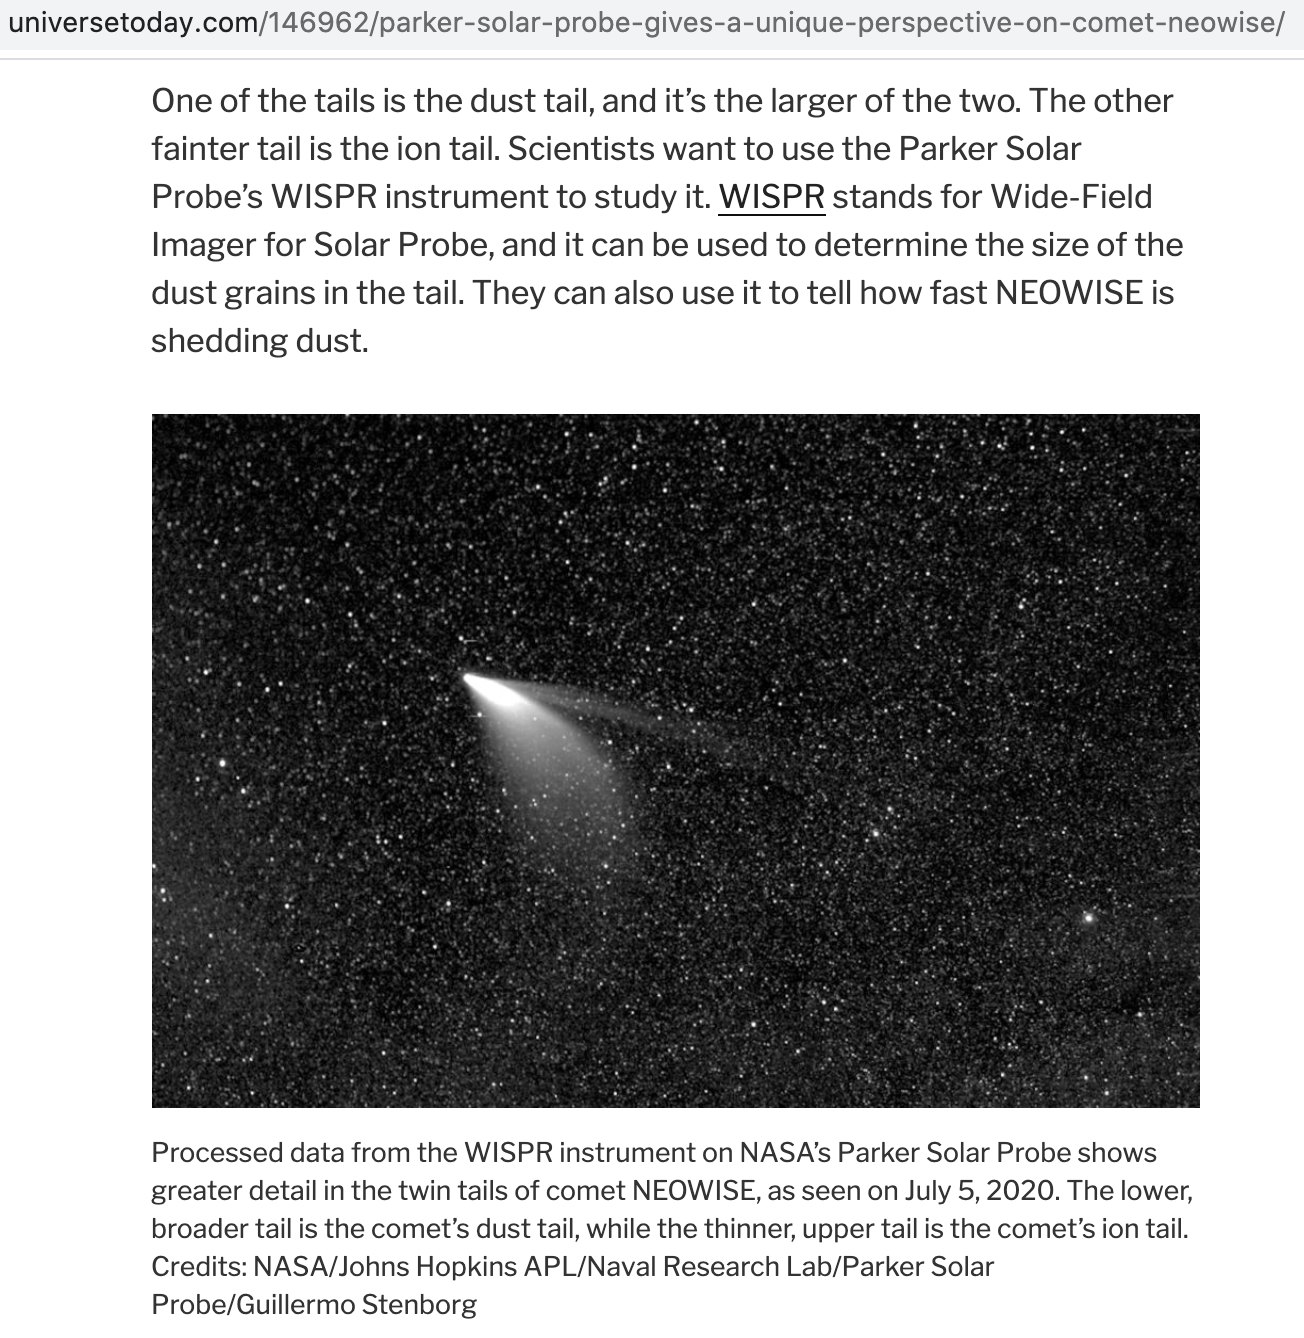 COmet NEOWISE has two tails.jpg